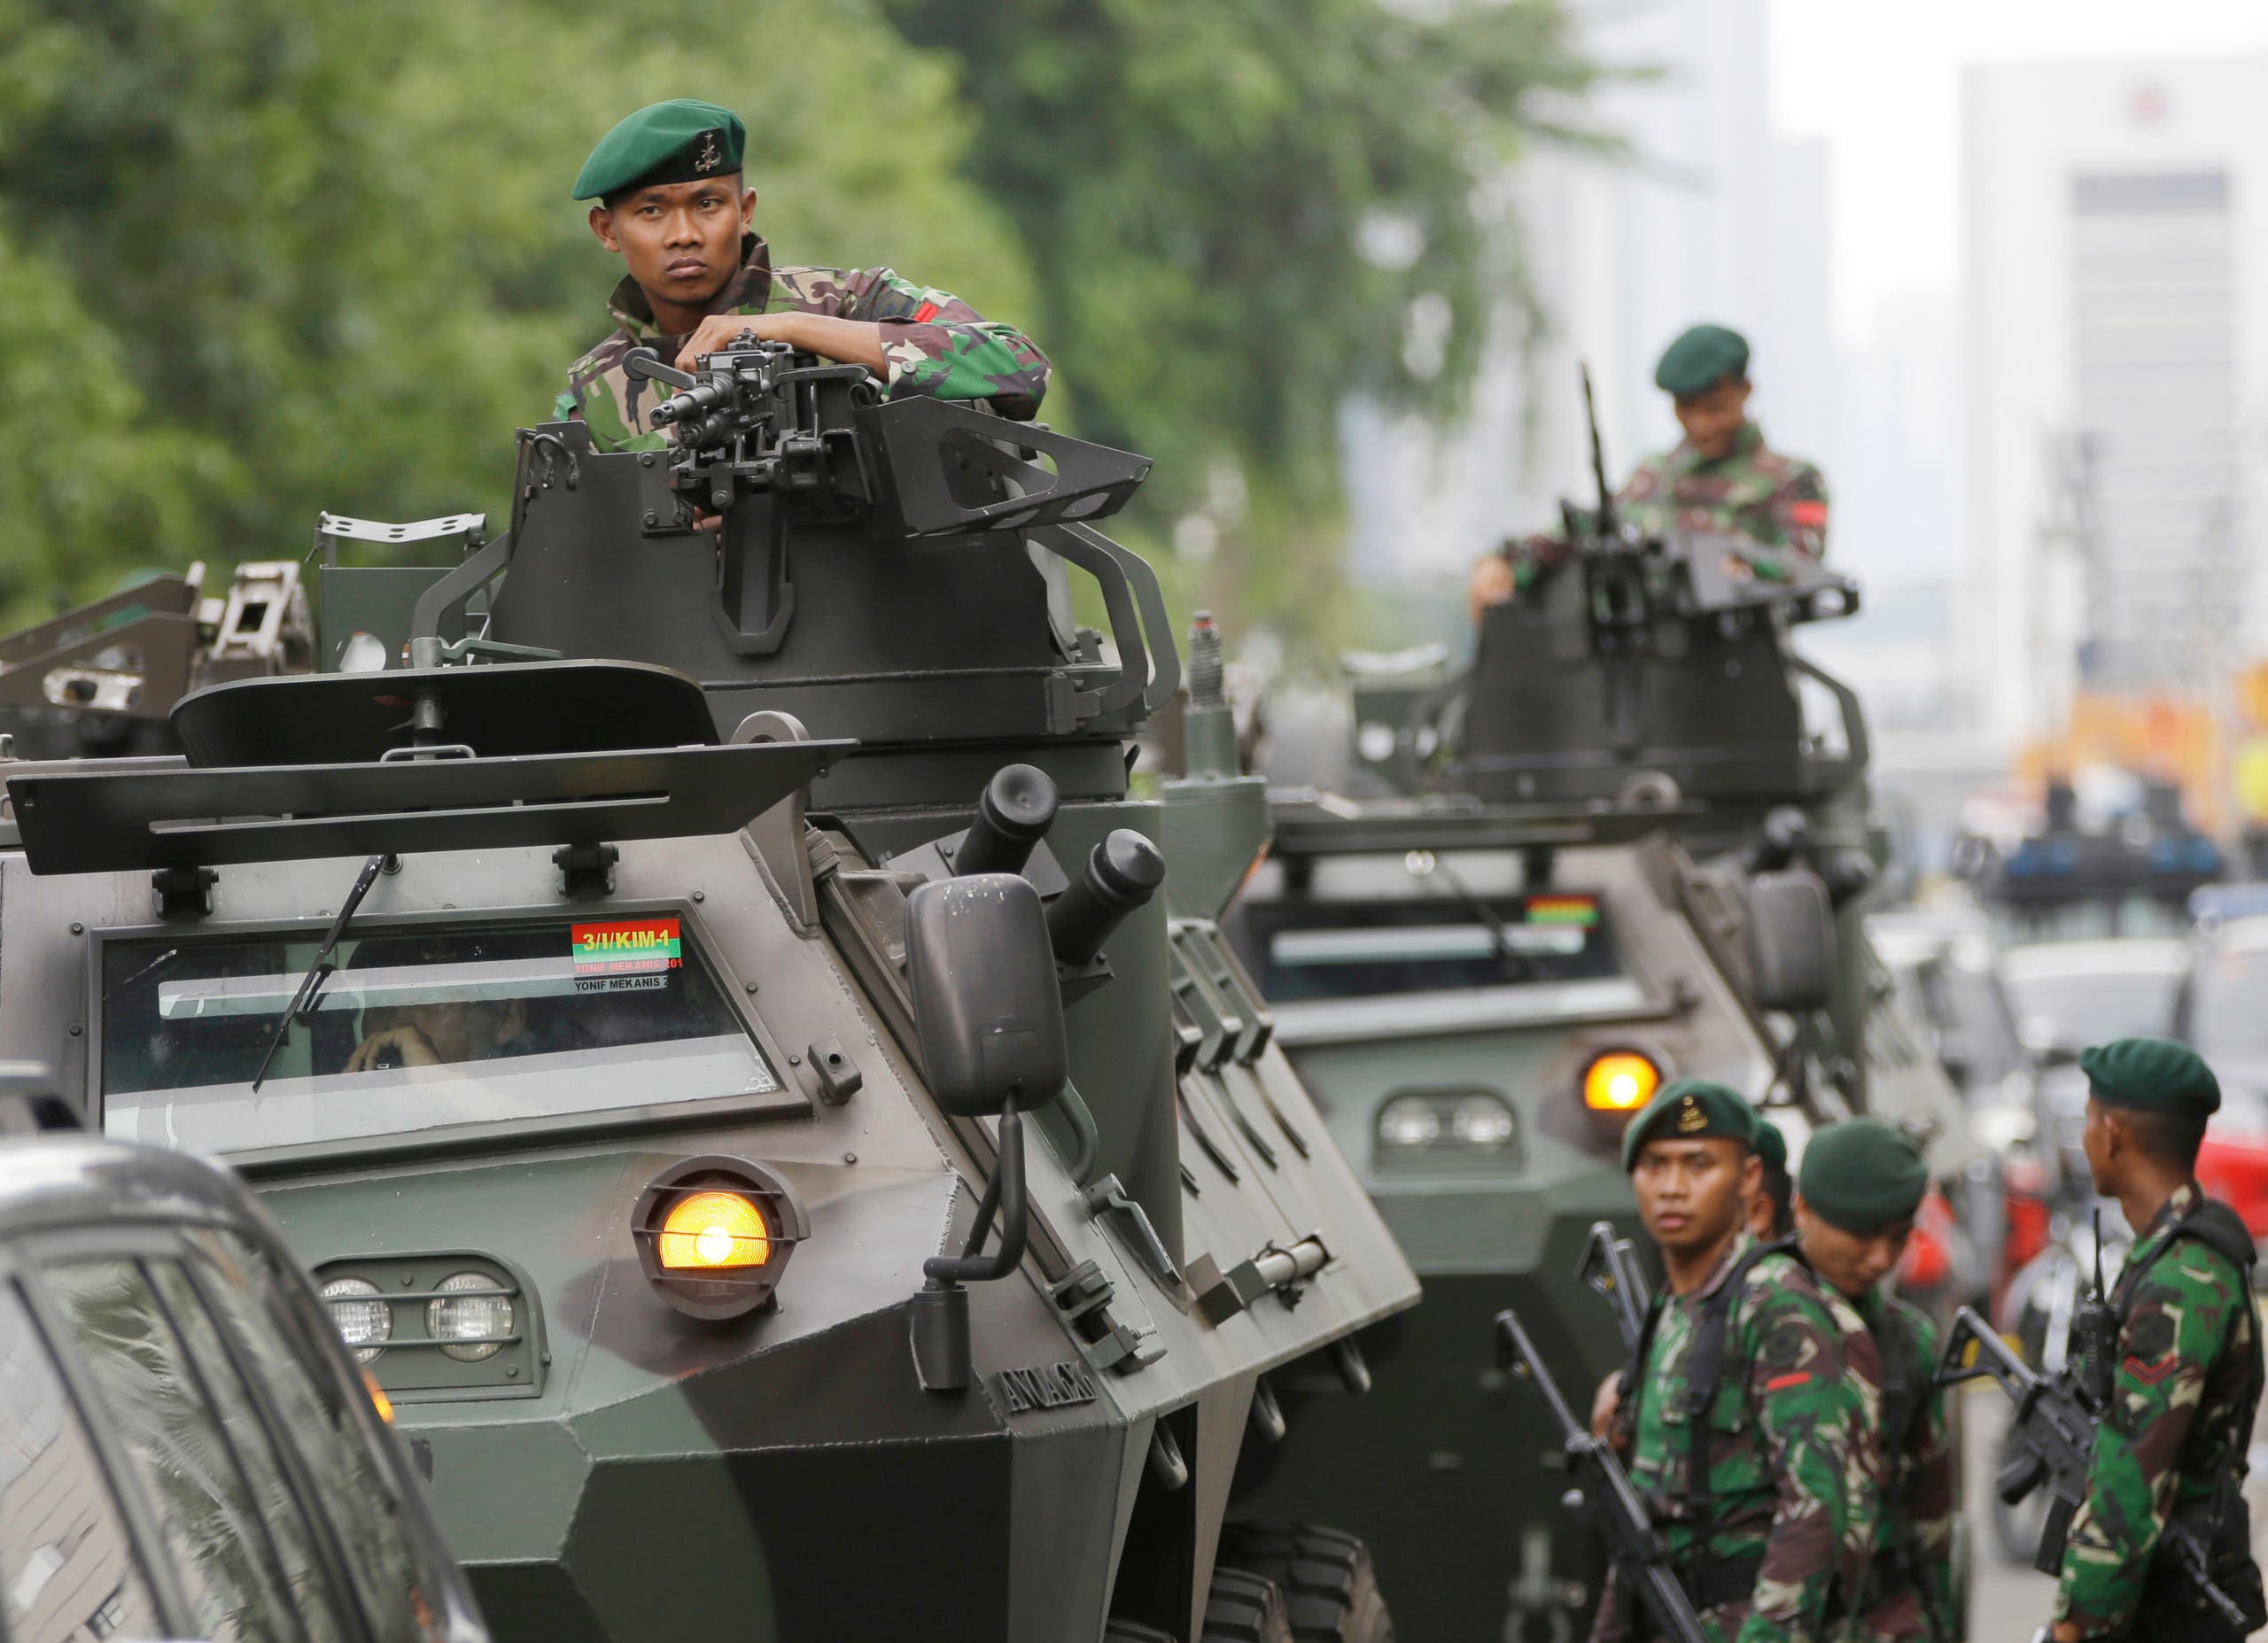  Indonesian soldiers man an armored vehicle as they guard near the site where an attack occurred in Jakarta, Indonesia Thursday, Jan. 14, 2016. Attackers set off explosions at a Starbucks cafe in a bustling shopping area in Indonesia's capital and waged gunbattles with police Thursday, leaving bodies in the streets as office workers watched in terror from high-rise windows. (AP Photo/Dita Alangkara)